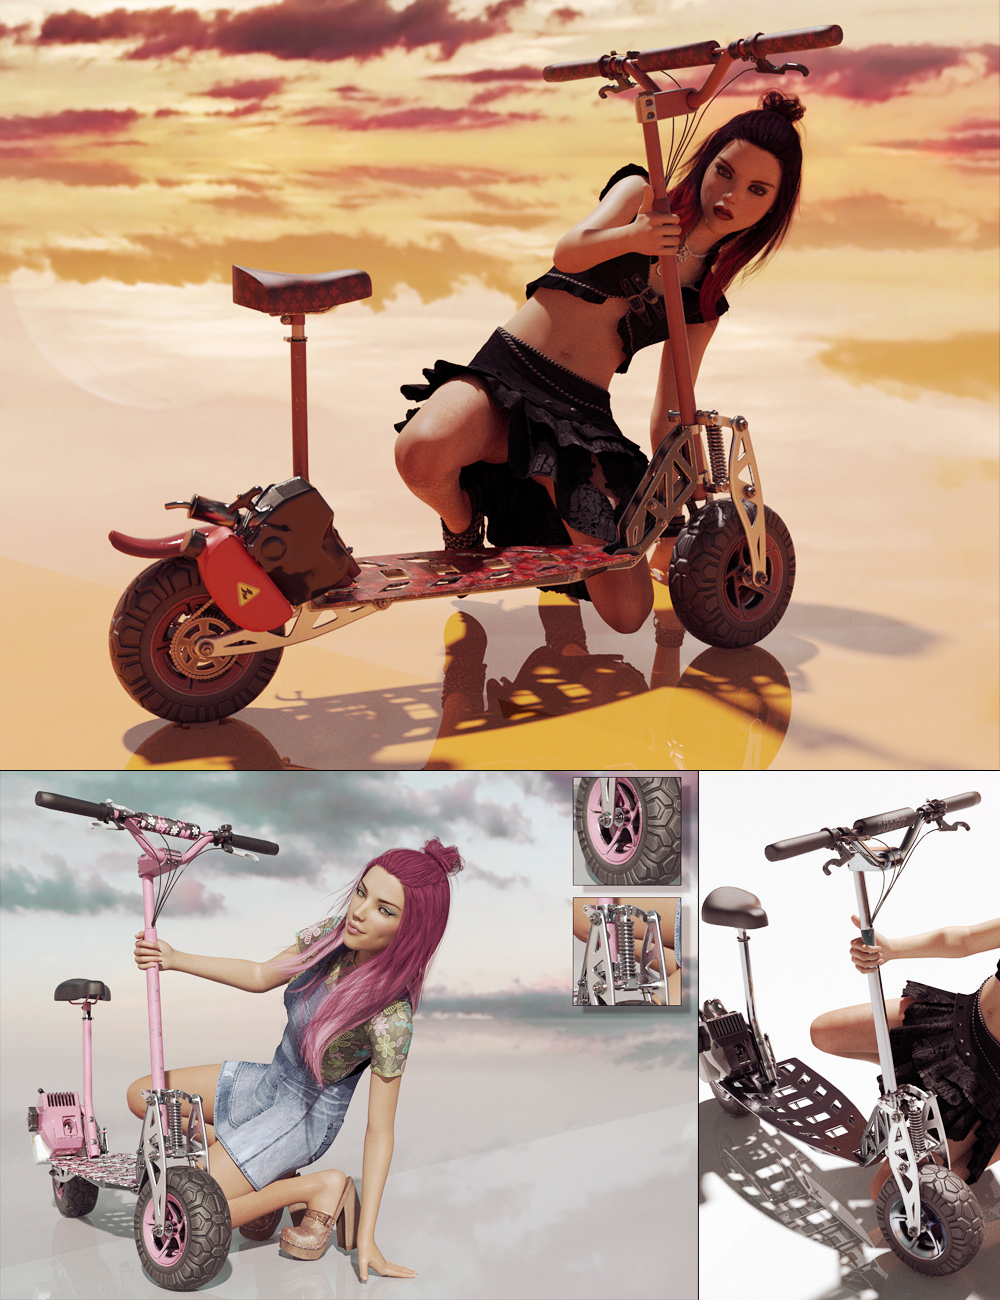 Xtreme GoPed by: ForbiddenWhispersDavid Brinnen, 3D Models by Daz 3D